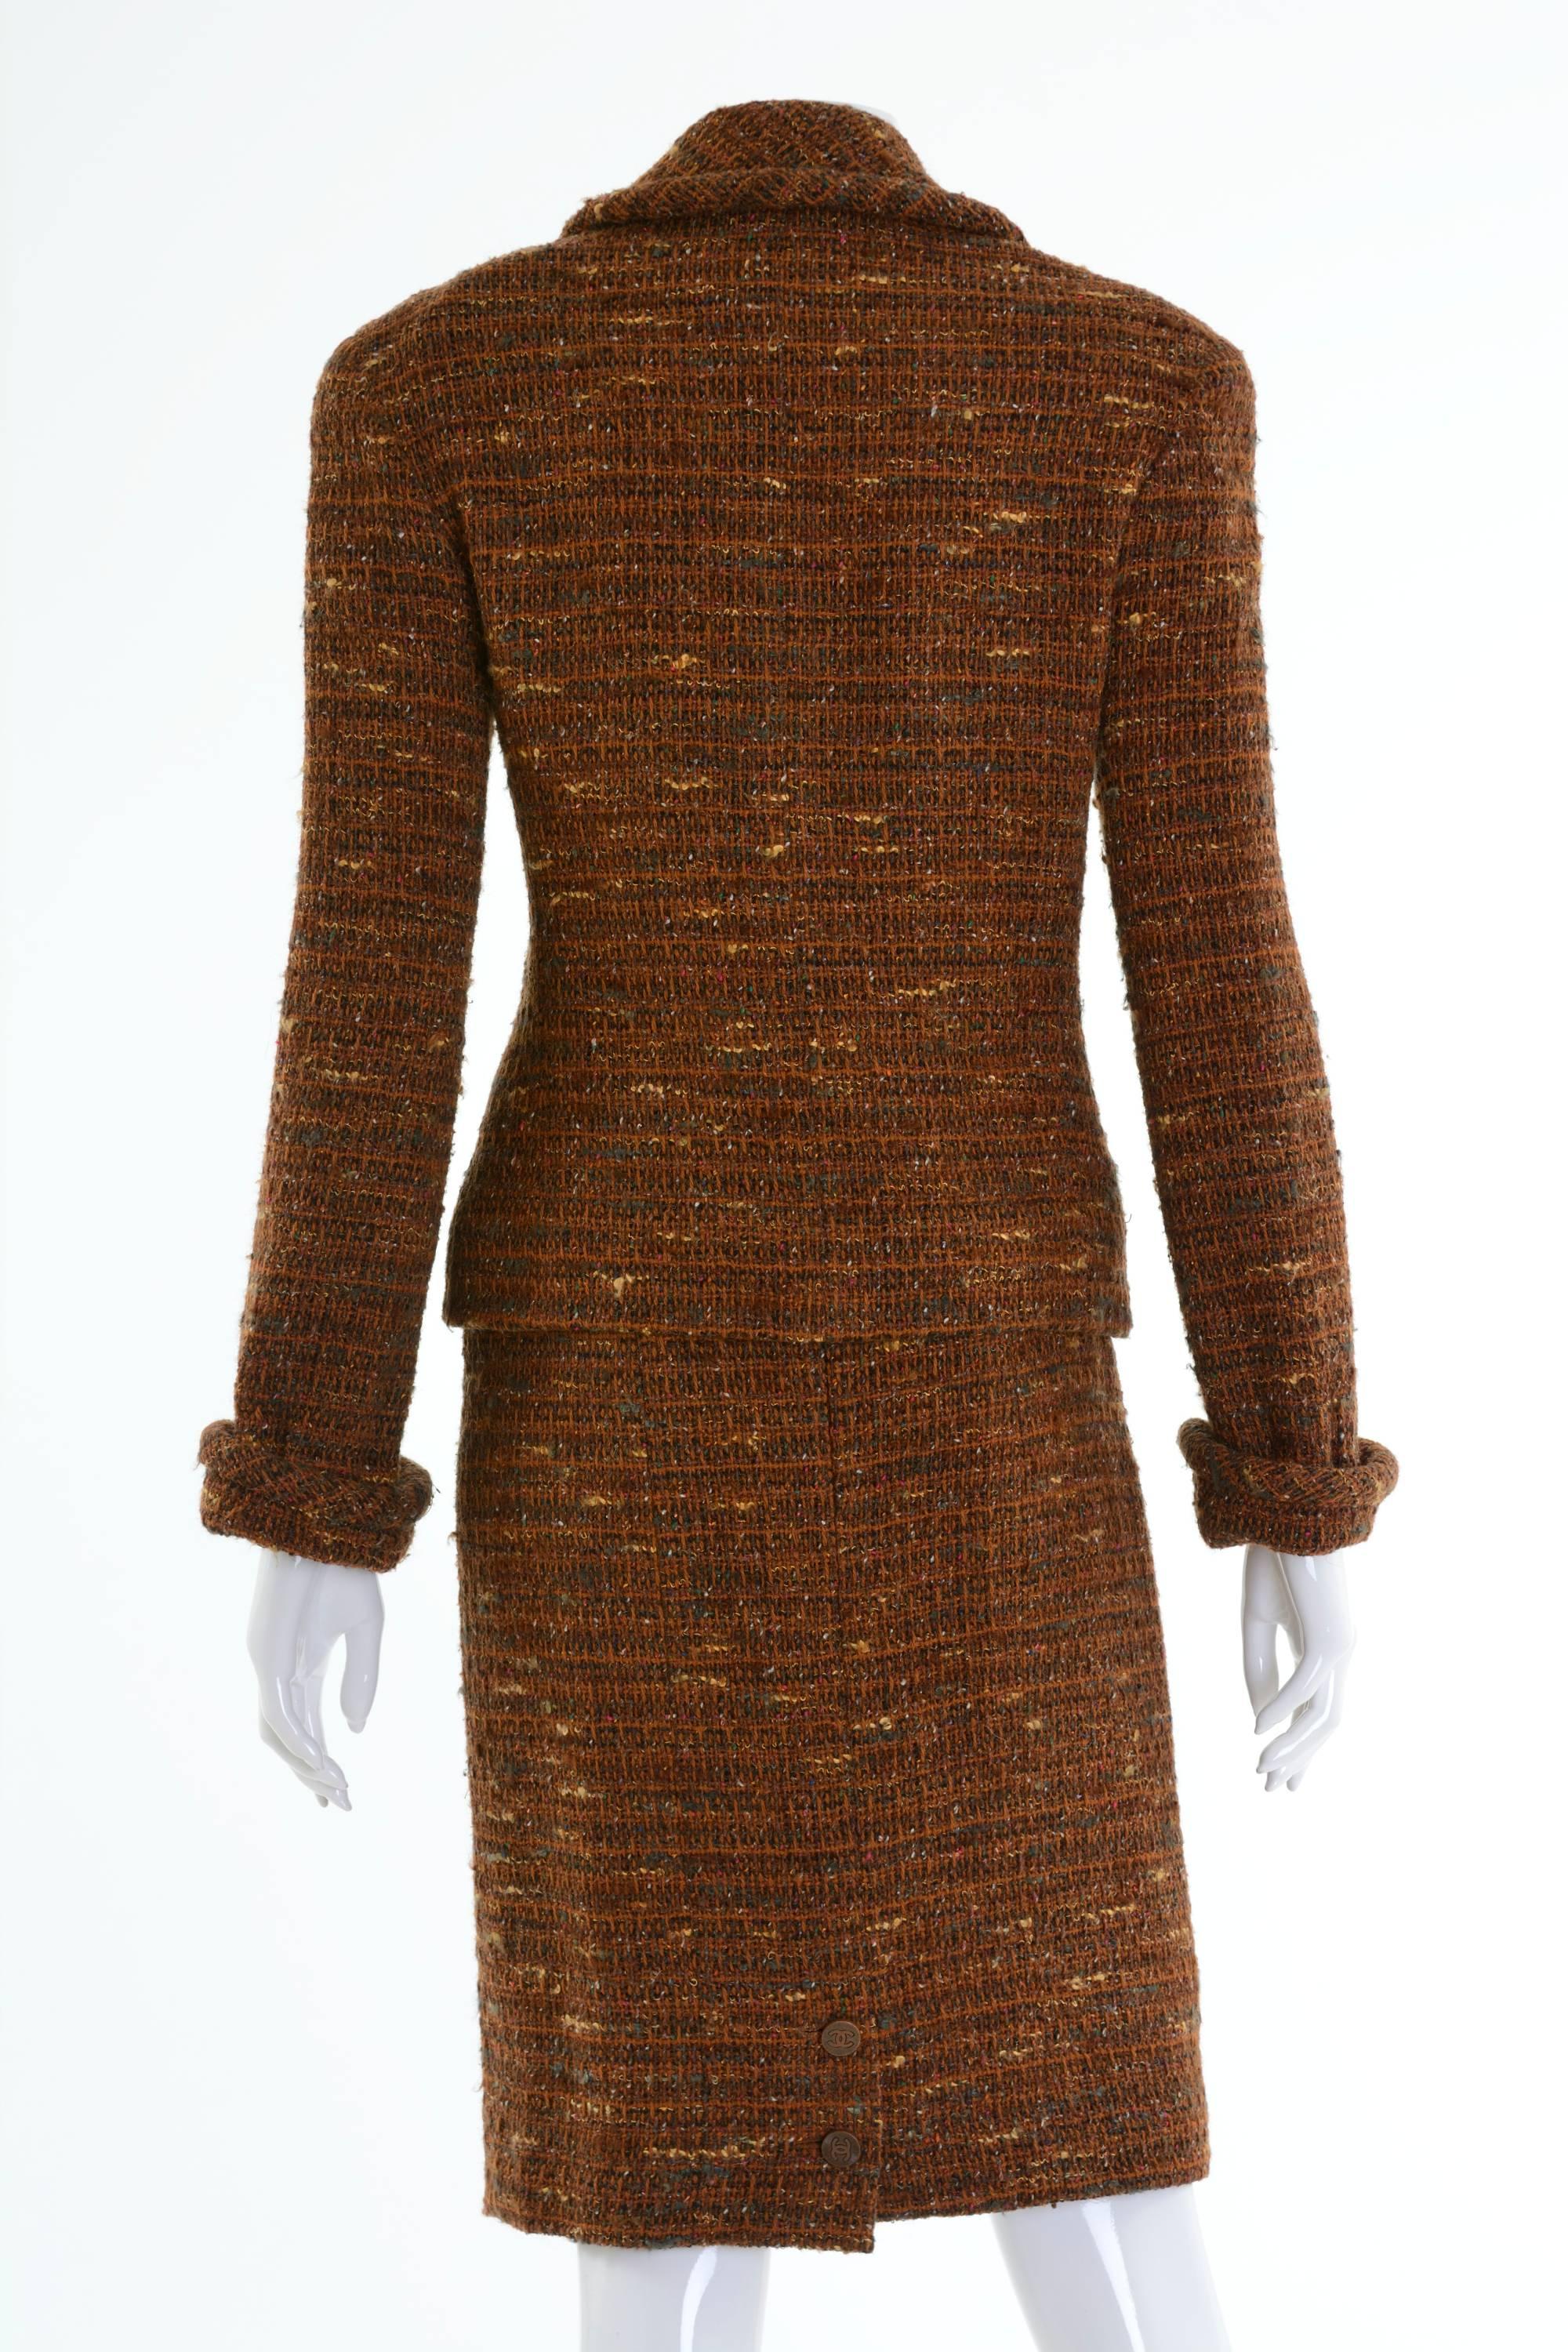 This adorable and authentic Chanel suit dress is in a brown salt and pepper boucle wool fabric. The jacket has shoulder pads, two front little pockets and closing with CC logo copper metal buttons. The pencil skirt has back zip closure with hook.